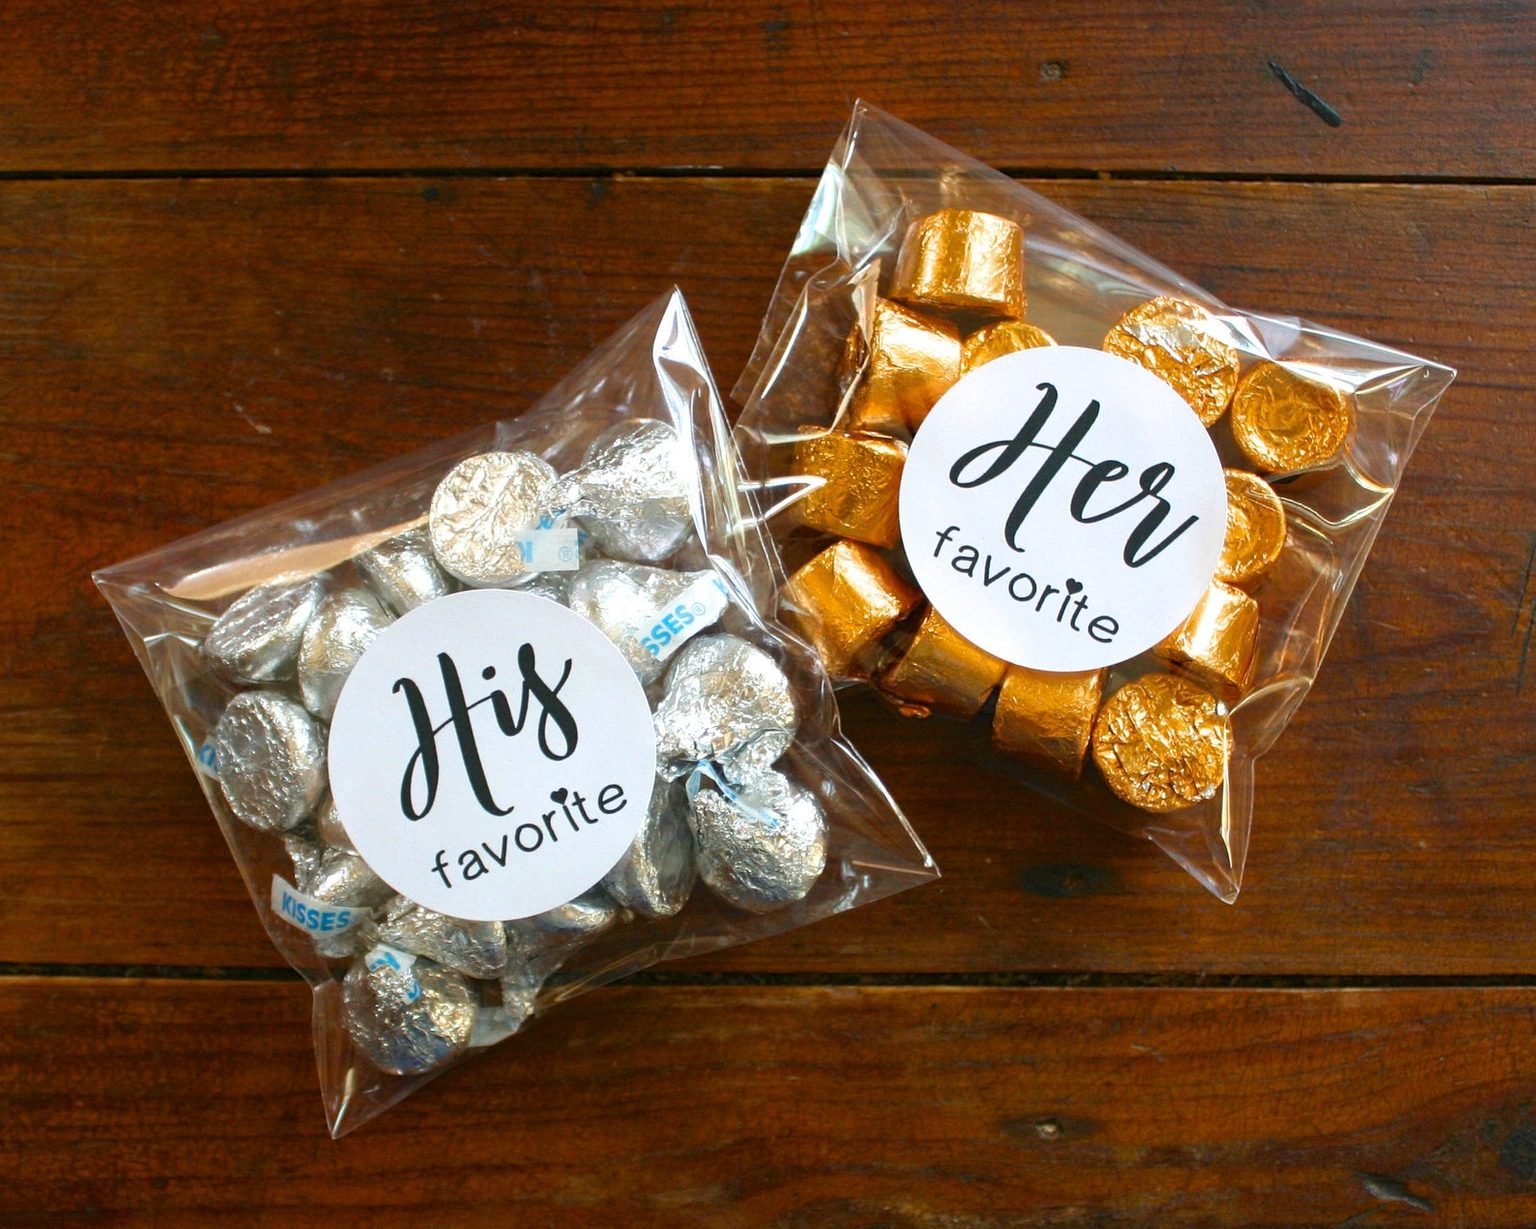 Wedding Thank You Gifts 15 Items Your Guests Will Want to Take Home